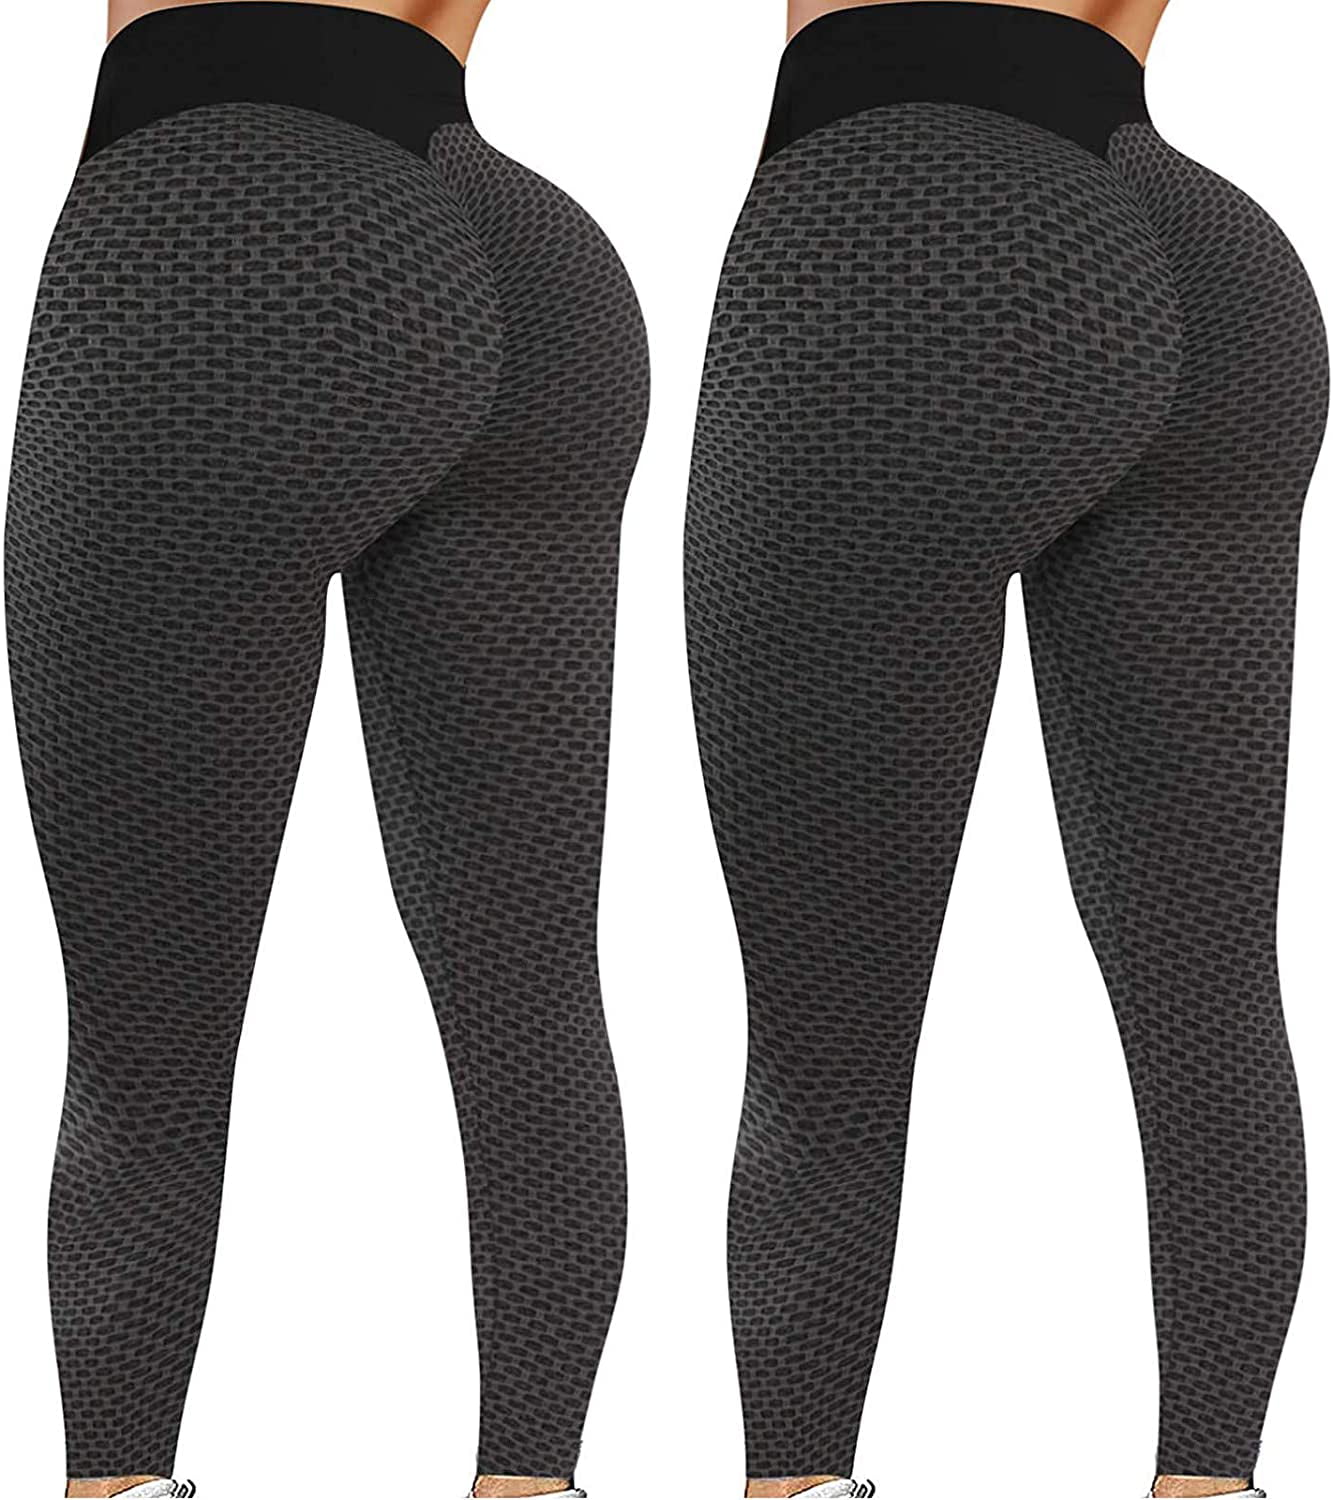 Aokarry Stretchy High Waist Workout Yoga Pants for Women Solid Color Leggings for Training 